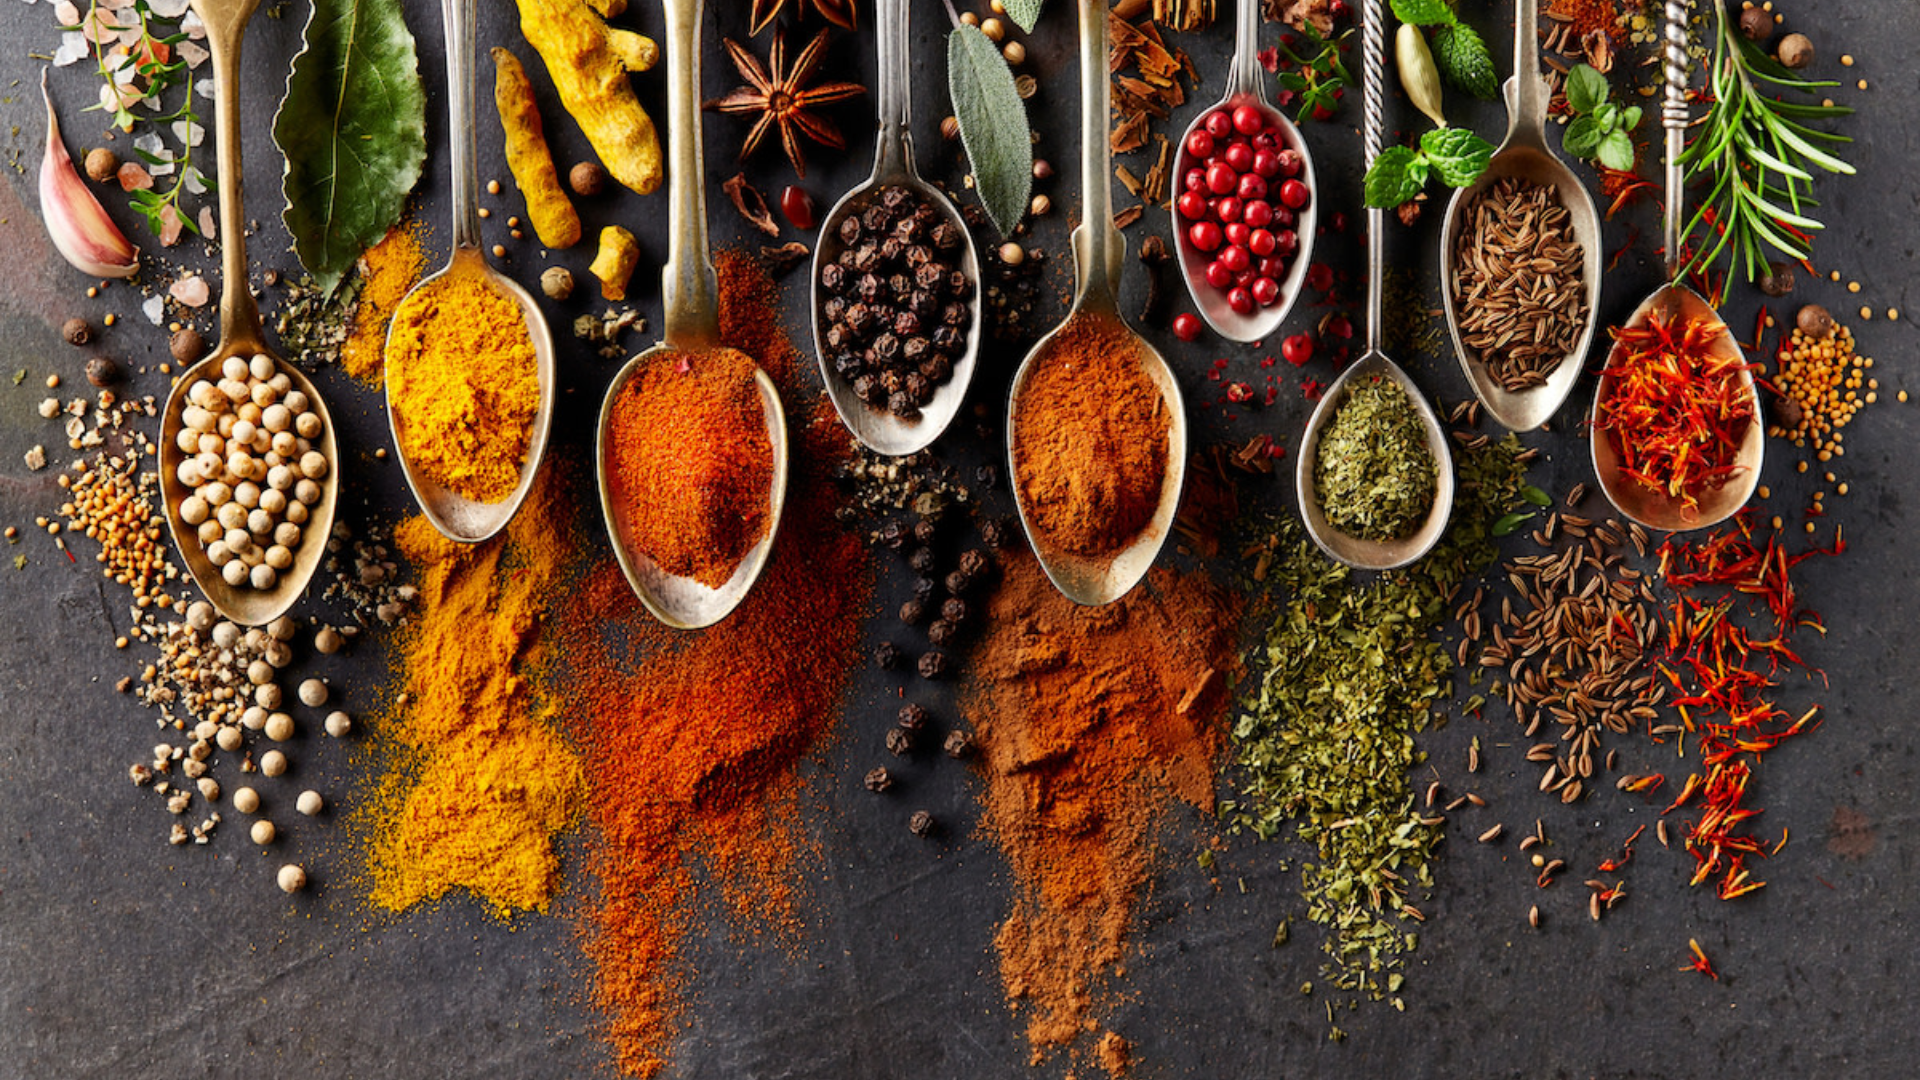 Summer Spices Guide: spices To Beat the Heat And Spices To Avoid For Digestive Health